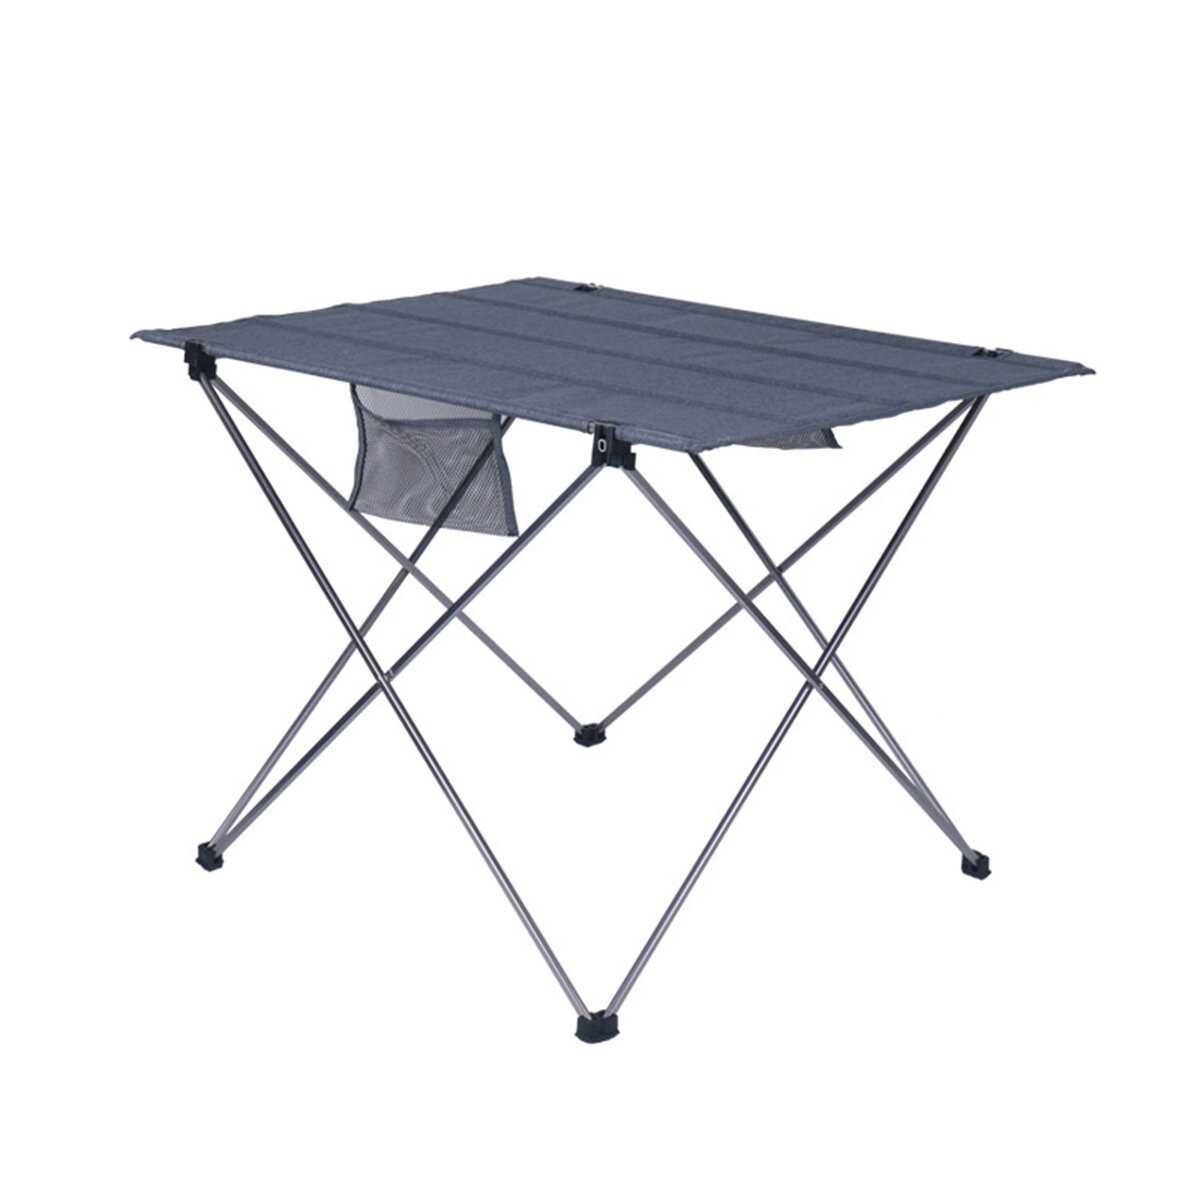 Foldable Camping Tables Aluminium Alloy Lightweight Folding Table Outdoor Furniture for Picnic Cooking BBQ Fishing